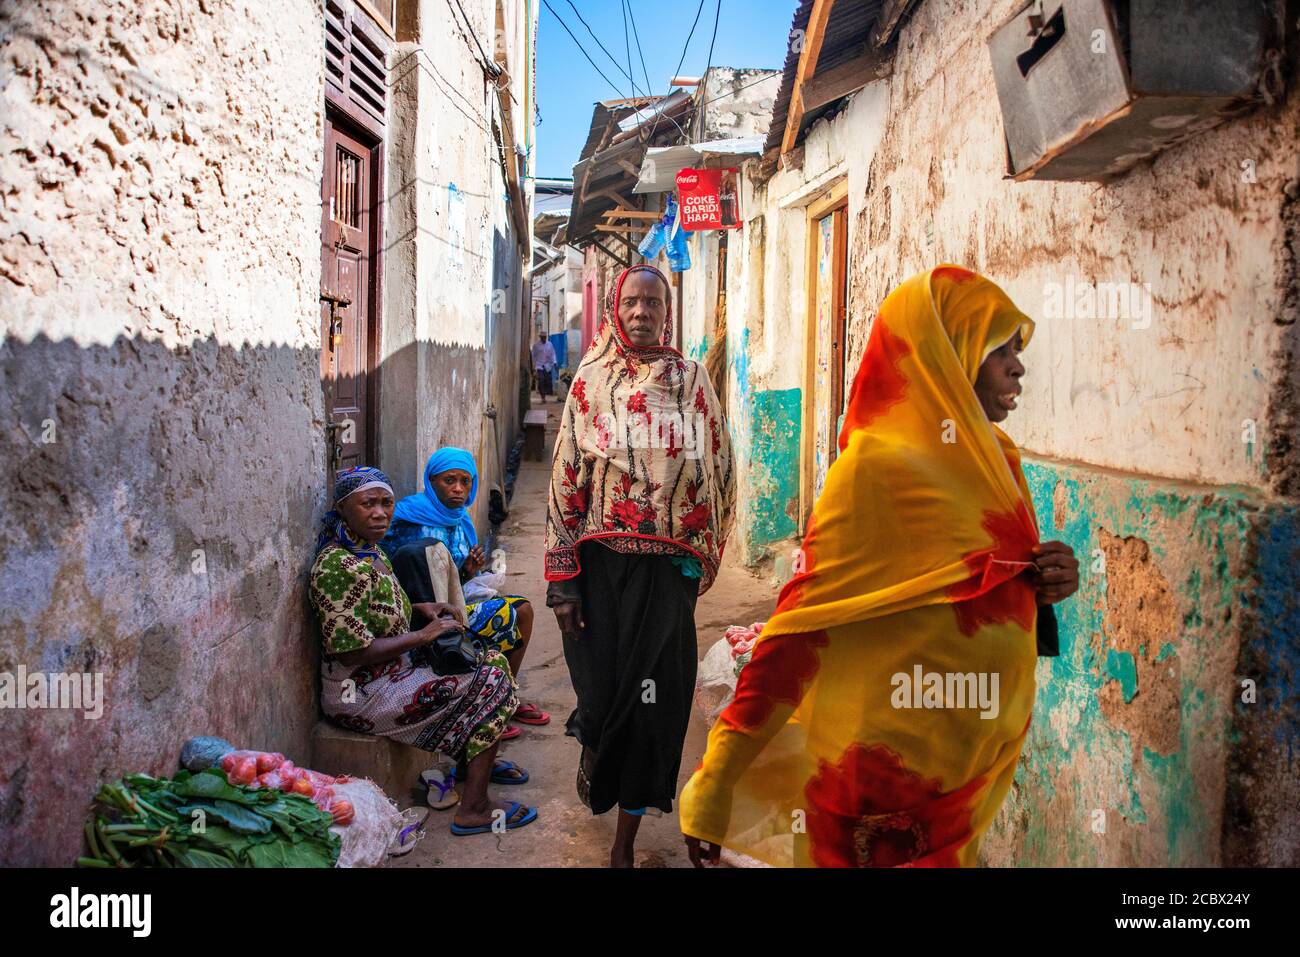 Swahili women with colorful veils in the strees of the city town of Lamu in Kenya Stock Photo